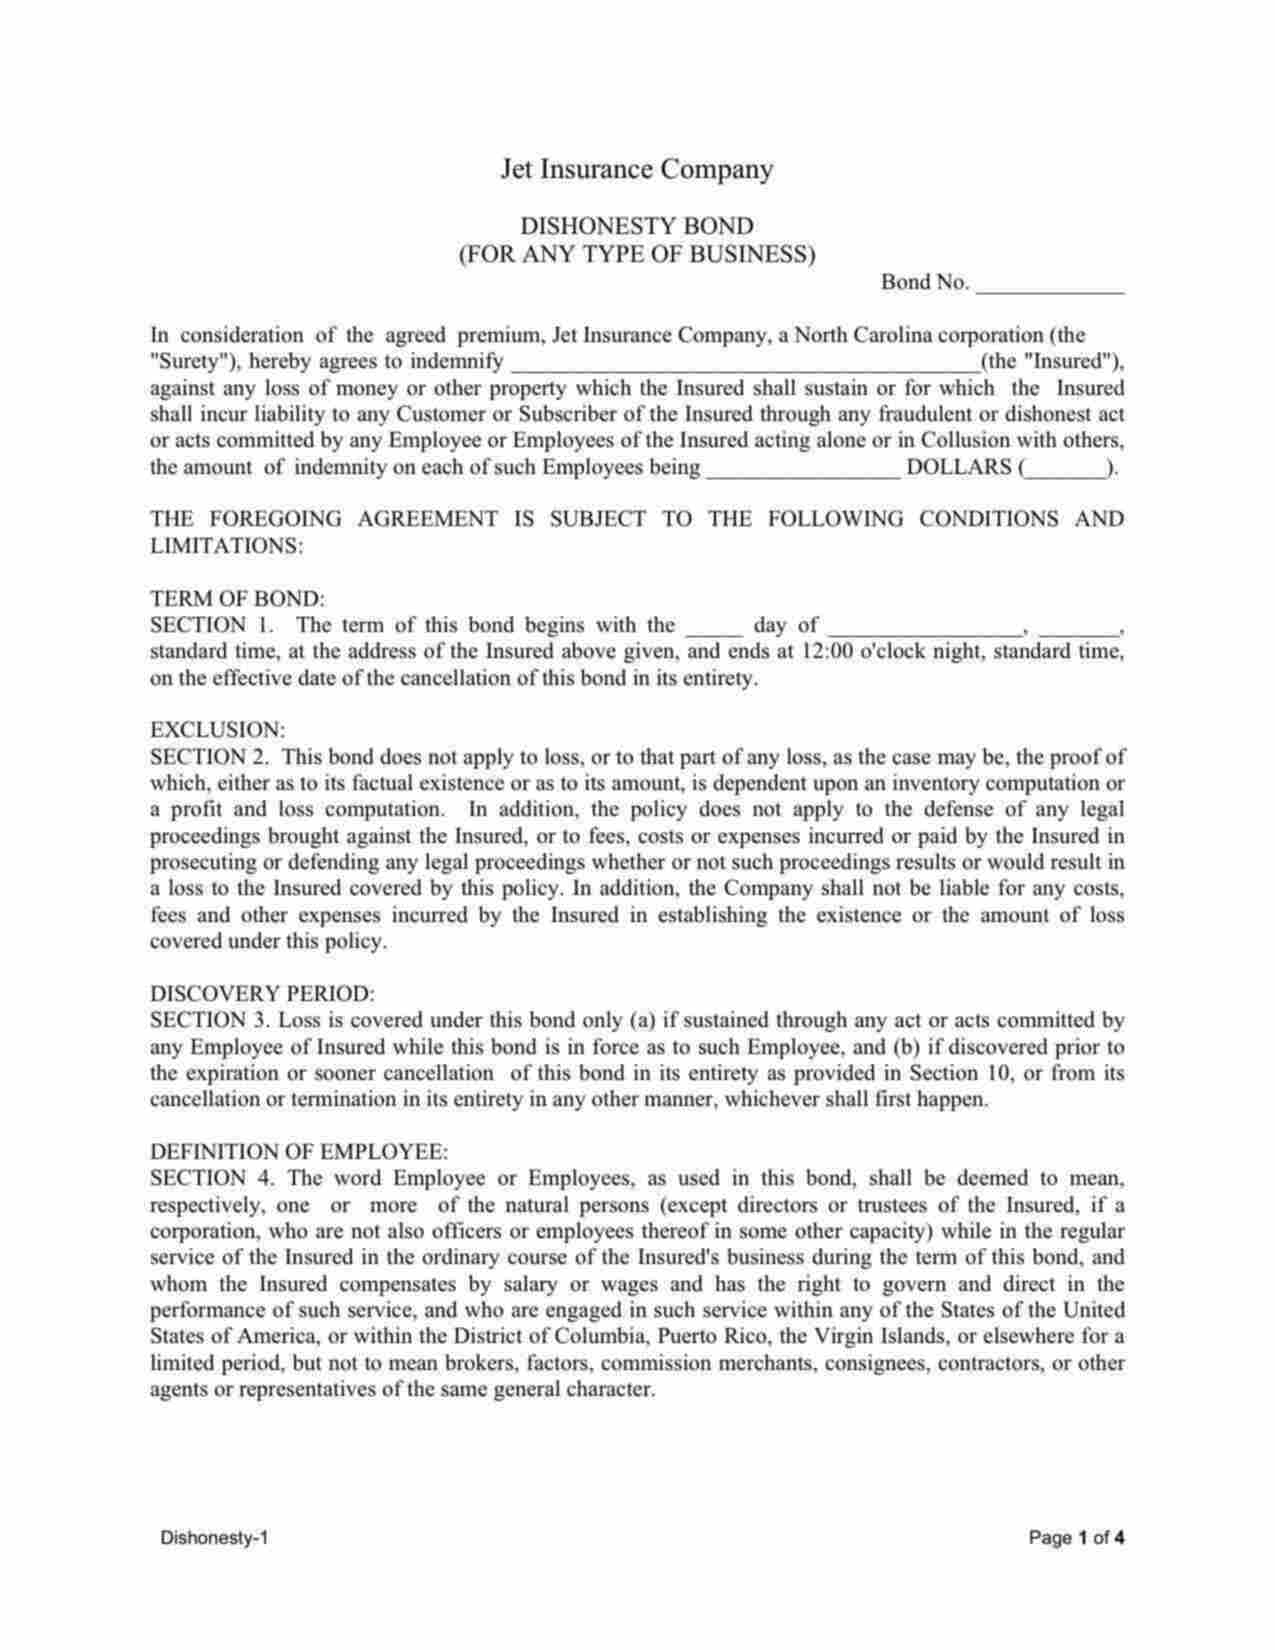 District of Columbia Janitorial Services Bond Form